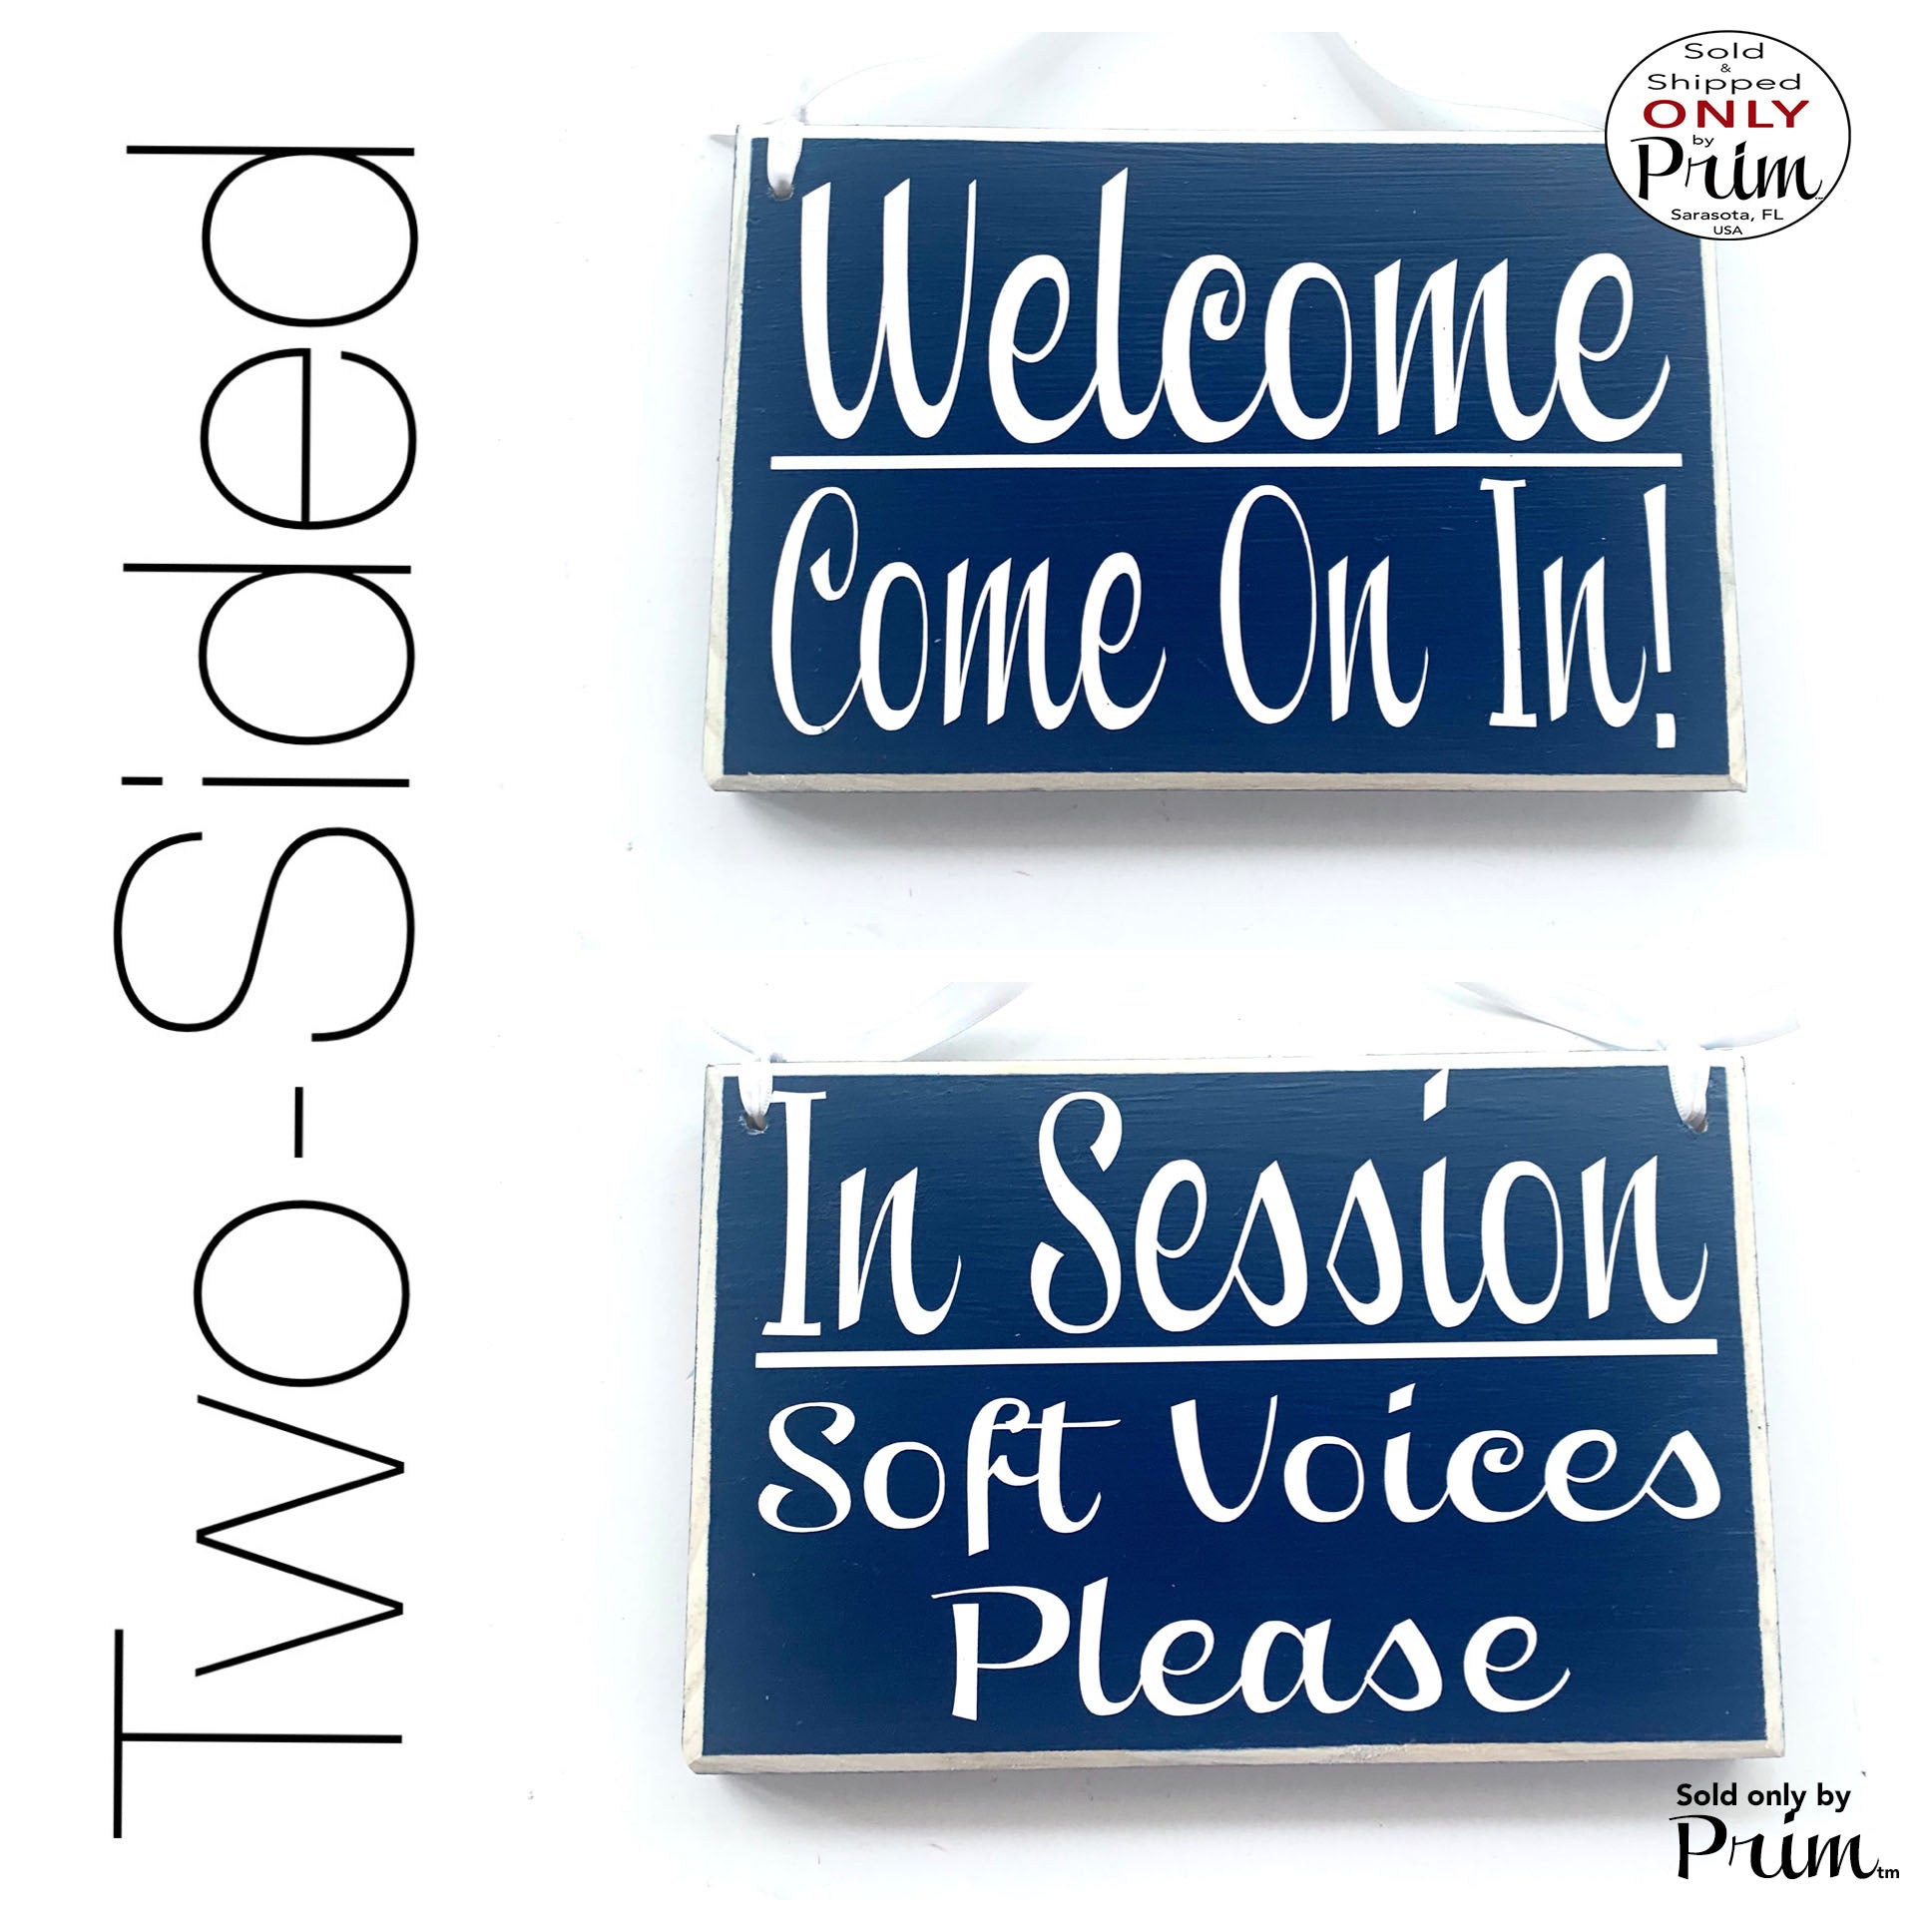 8x6 In Session Soft Voices Please Welcome Come On In Custom Wood Sign Do Not Disturb Spa Salon Wood Open Closed Office Door Hanger Designs by Prim